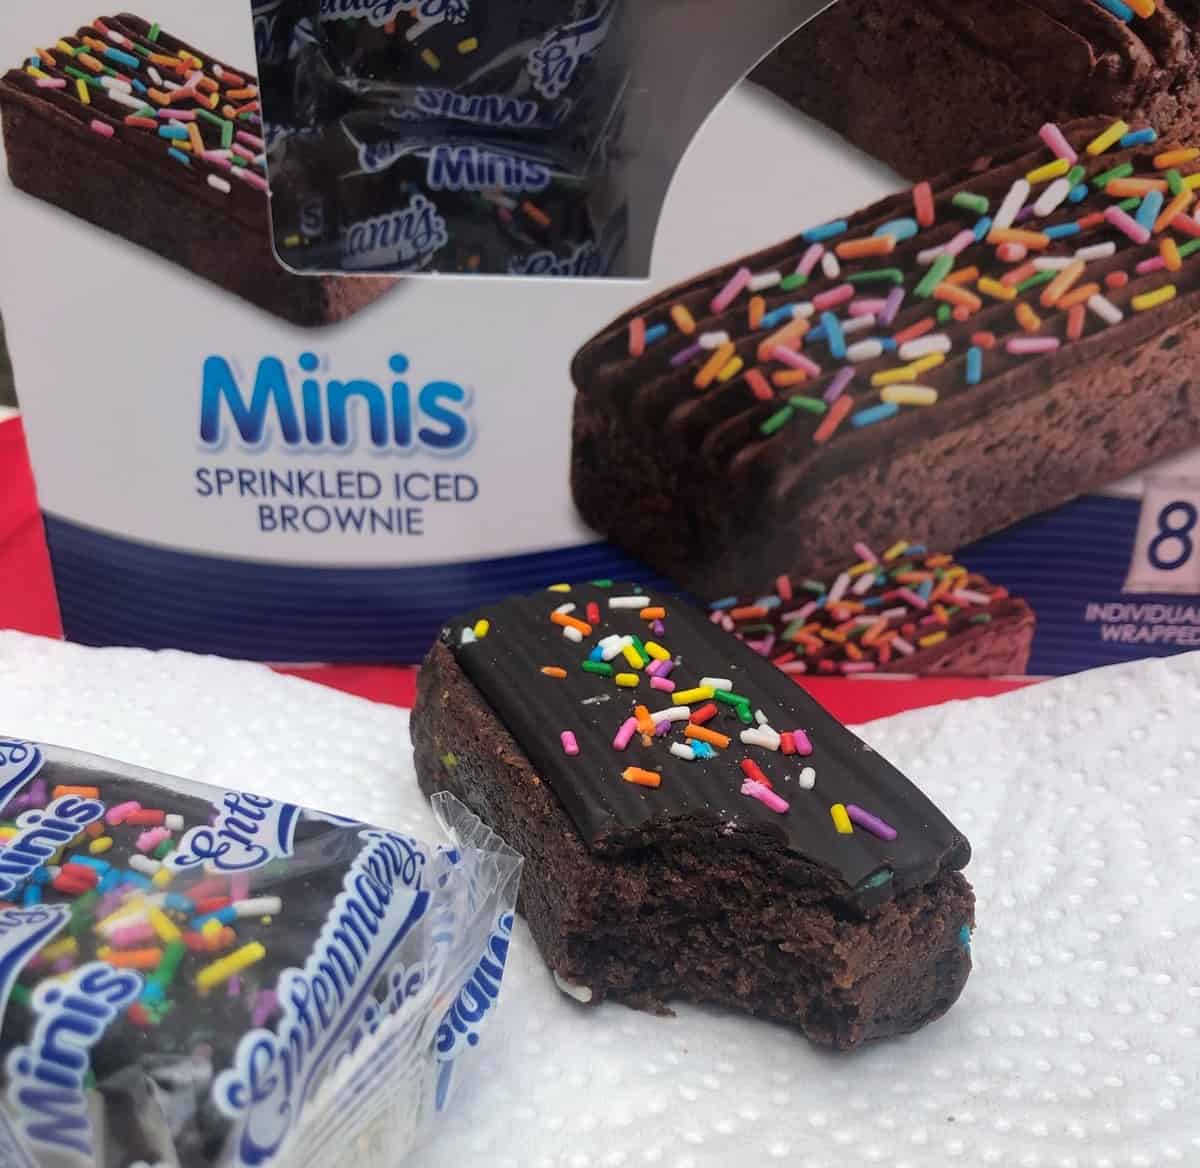 Celebrate the #SprinklefestGiveaway with #Entenmanns for the chance to win NEW Entenmann’s Minis Sprinkled Iced Brownies and more! Plus, enter for a chance to win a $25 Visa Gift Card right here!